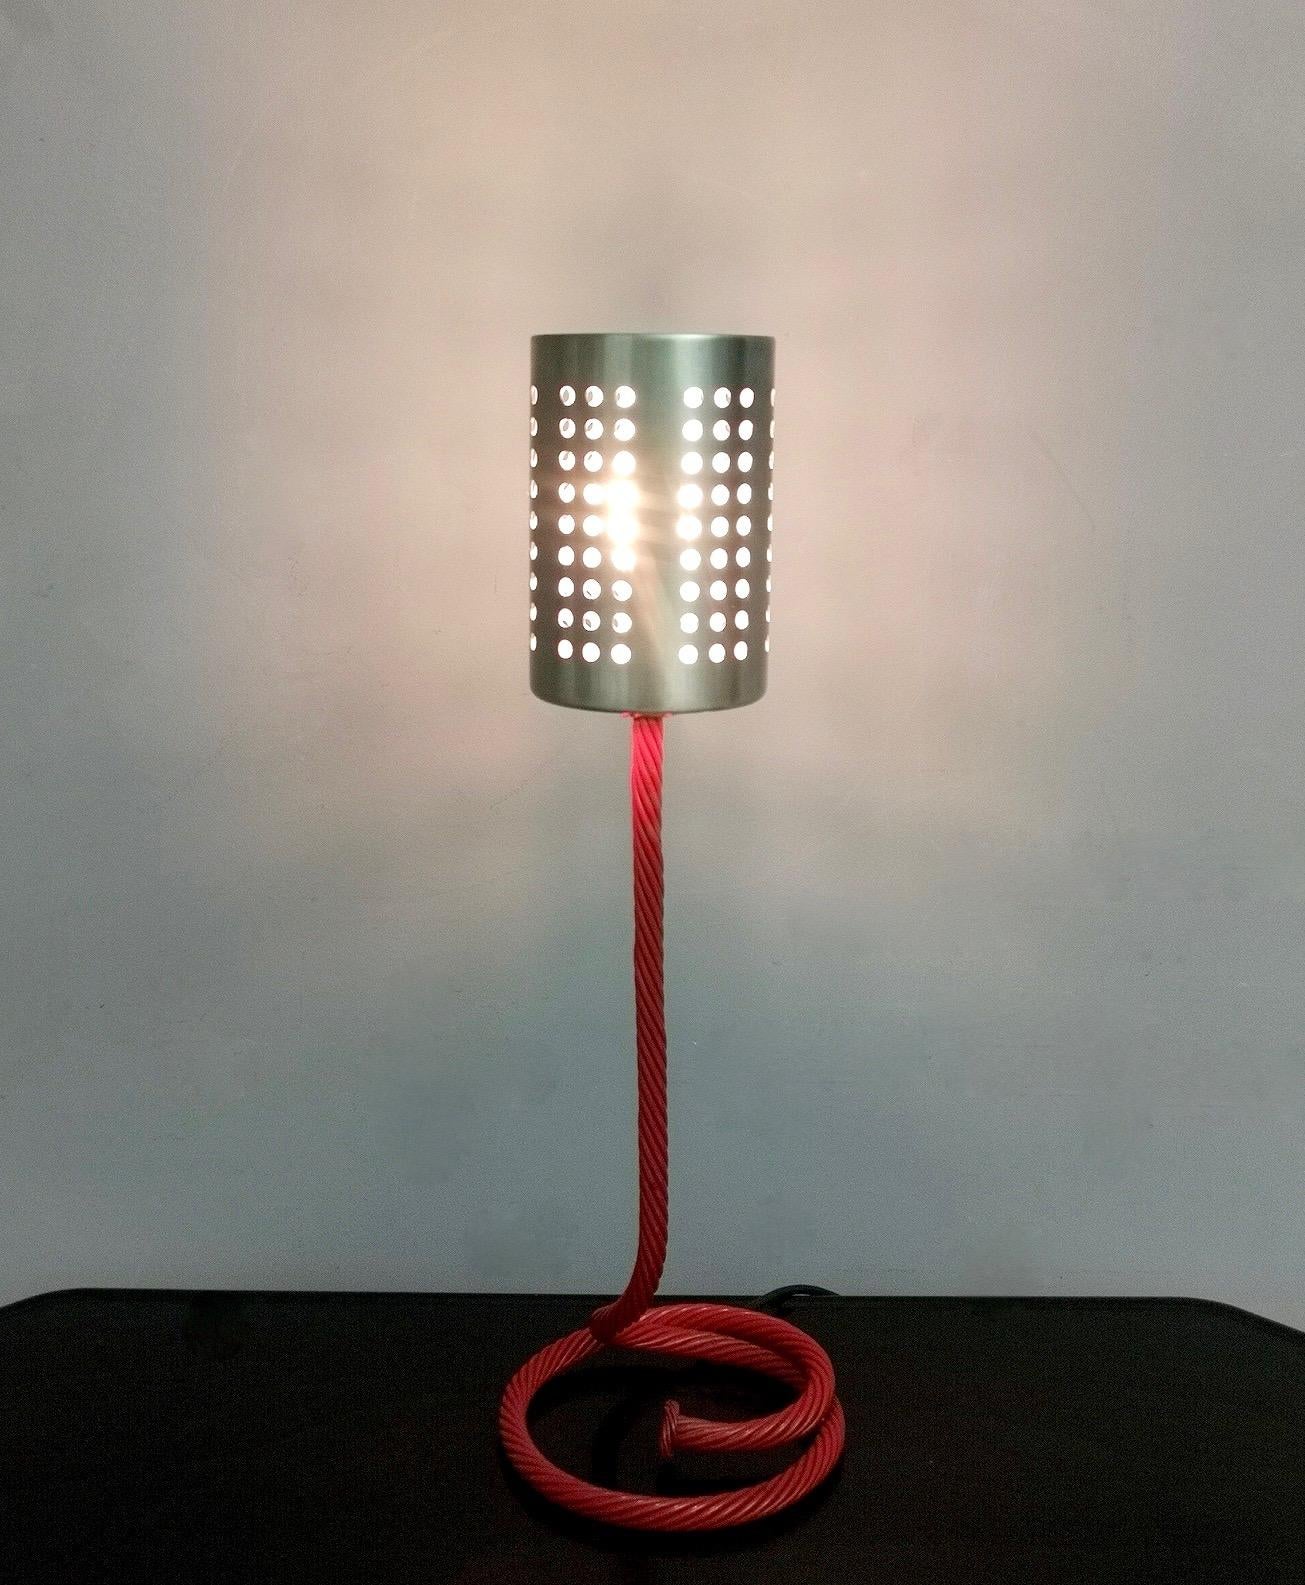 Varnished Metal and Aluminum Table Lamp by Carmelo La Gaipa, Italy, 2019 In Excellent Condition For Sale In Bresso, Lombardy